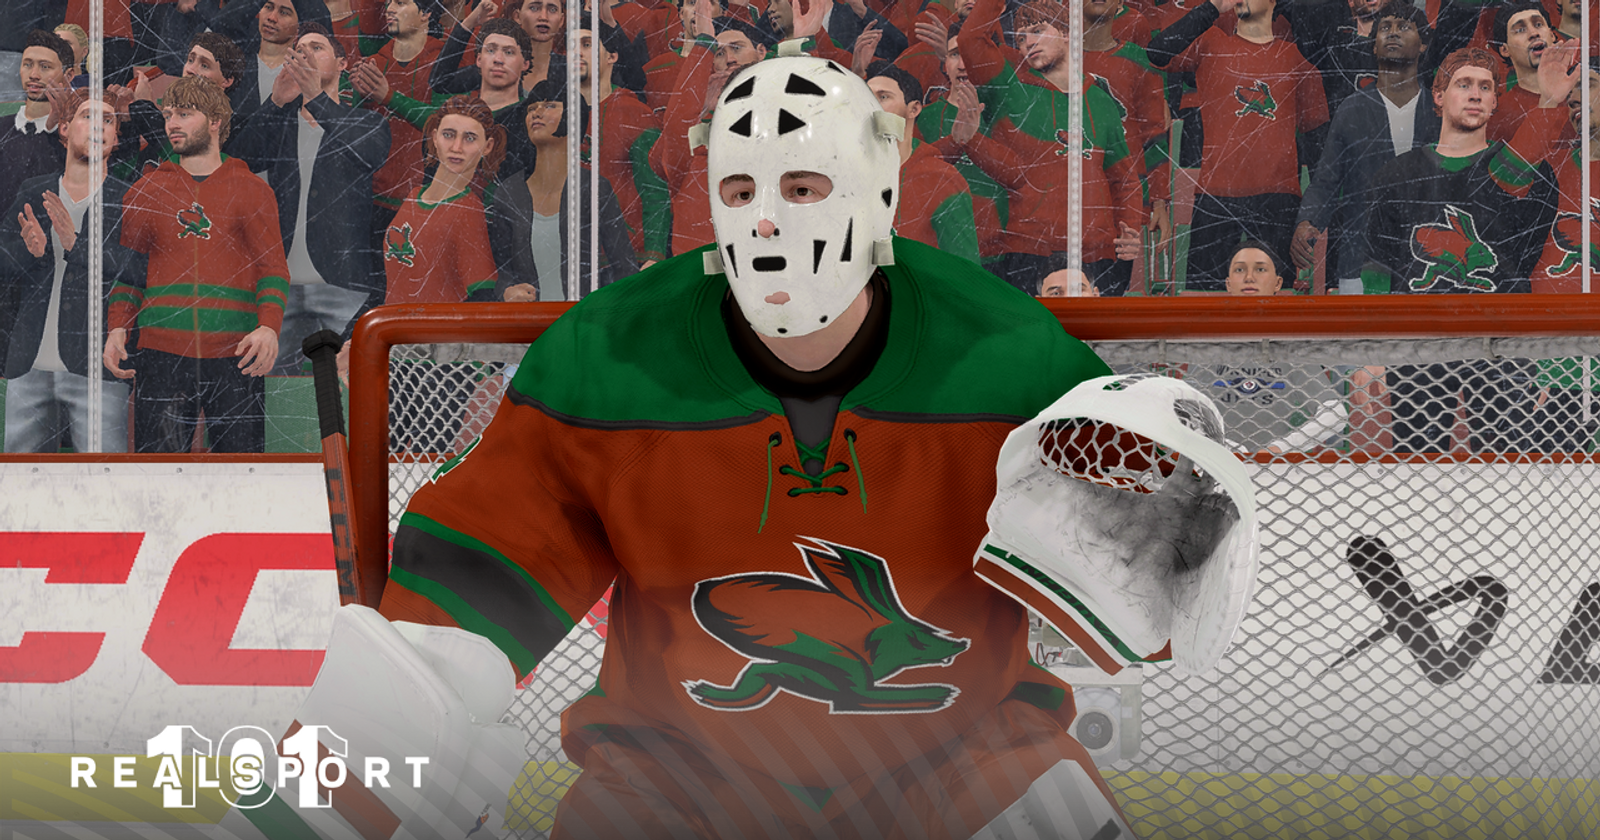 How to Start Franchise Mode With a Custom Team in NHL 22